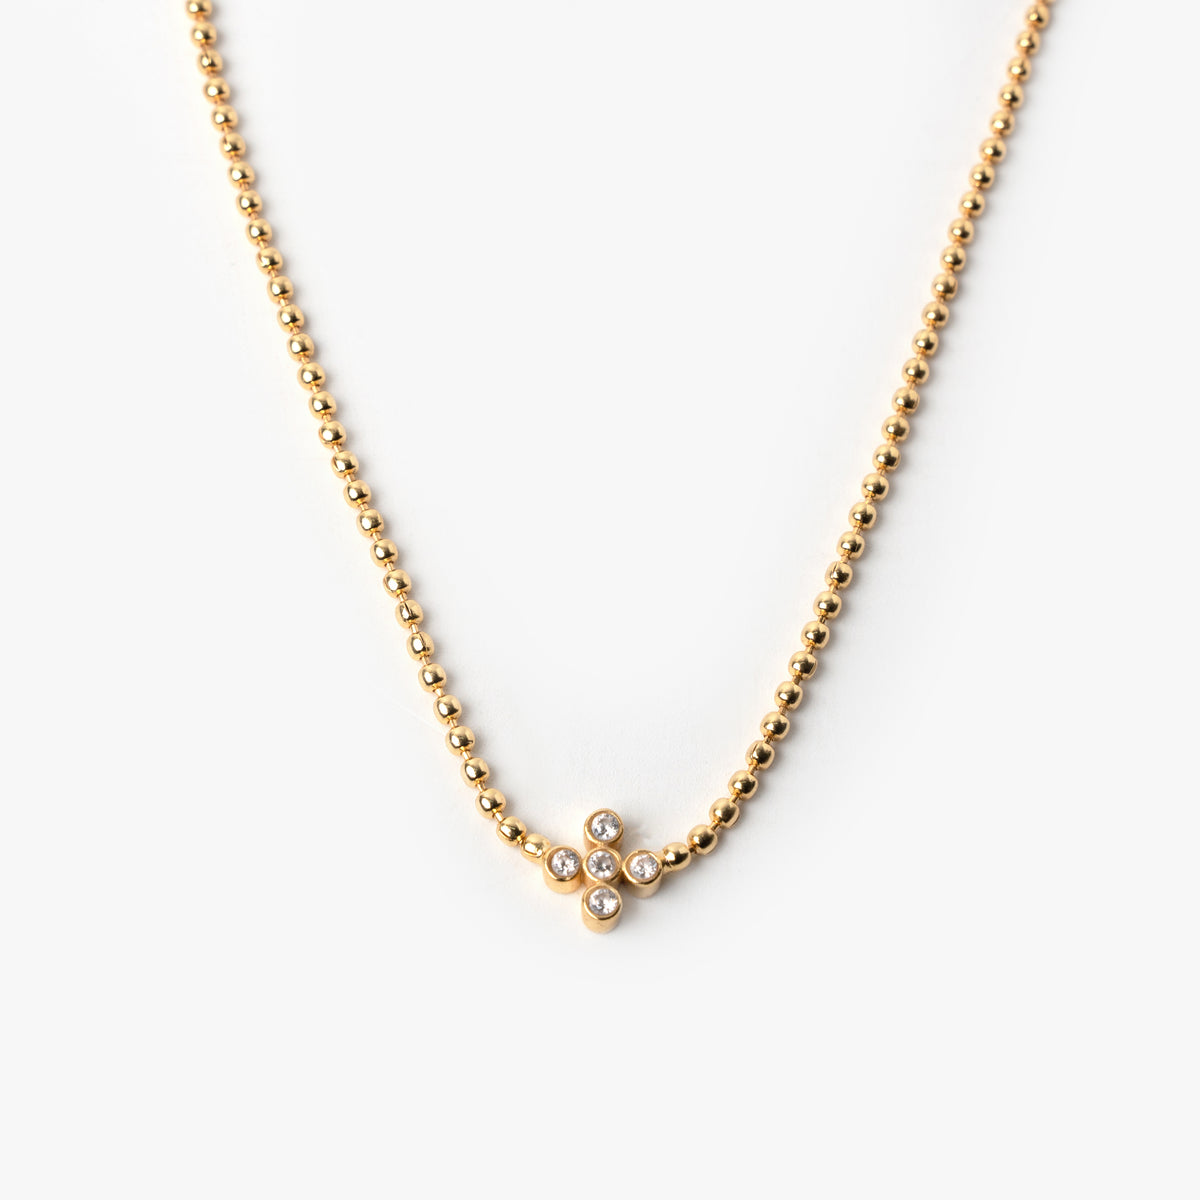 Sirius Star Necklace - Gold Tone